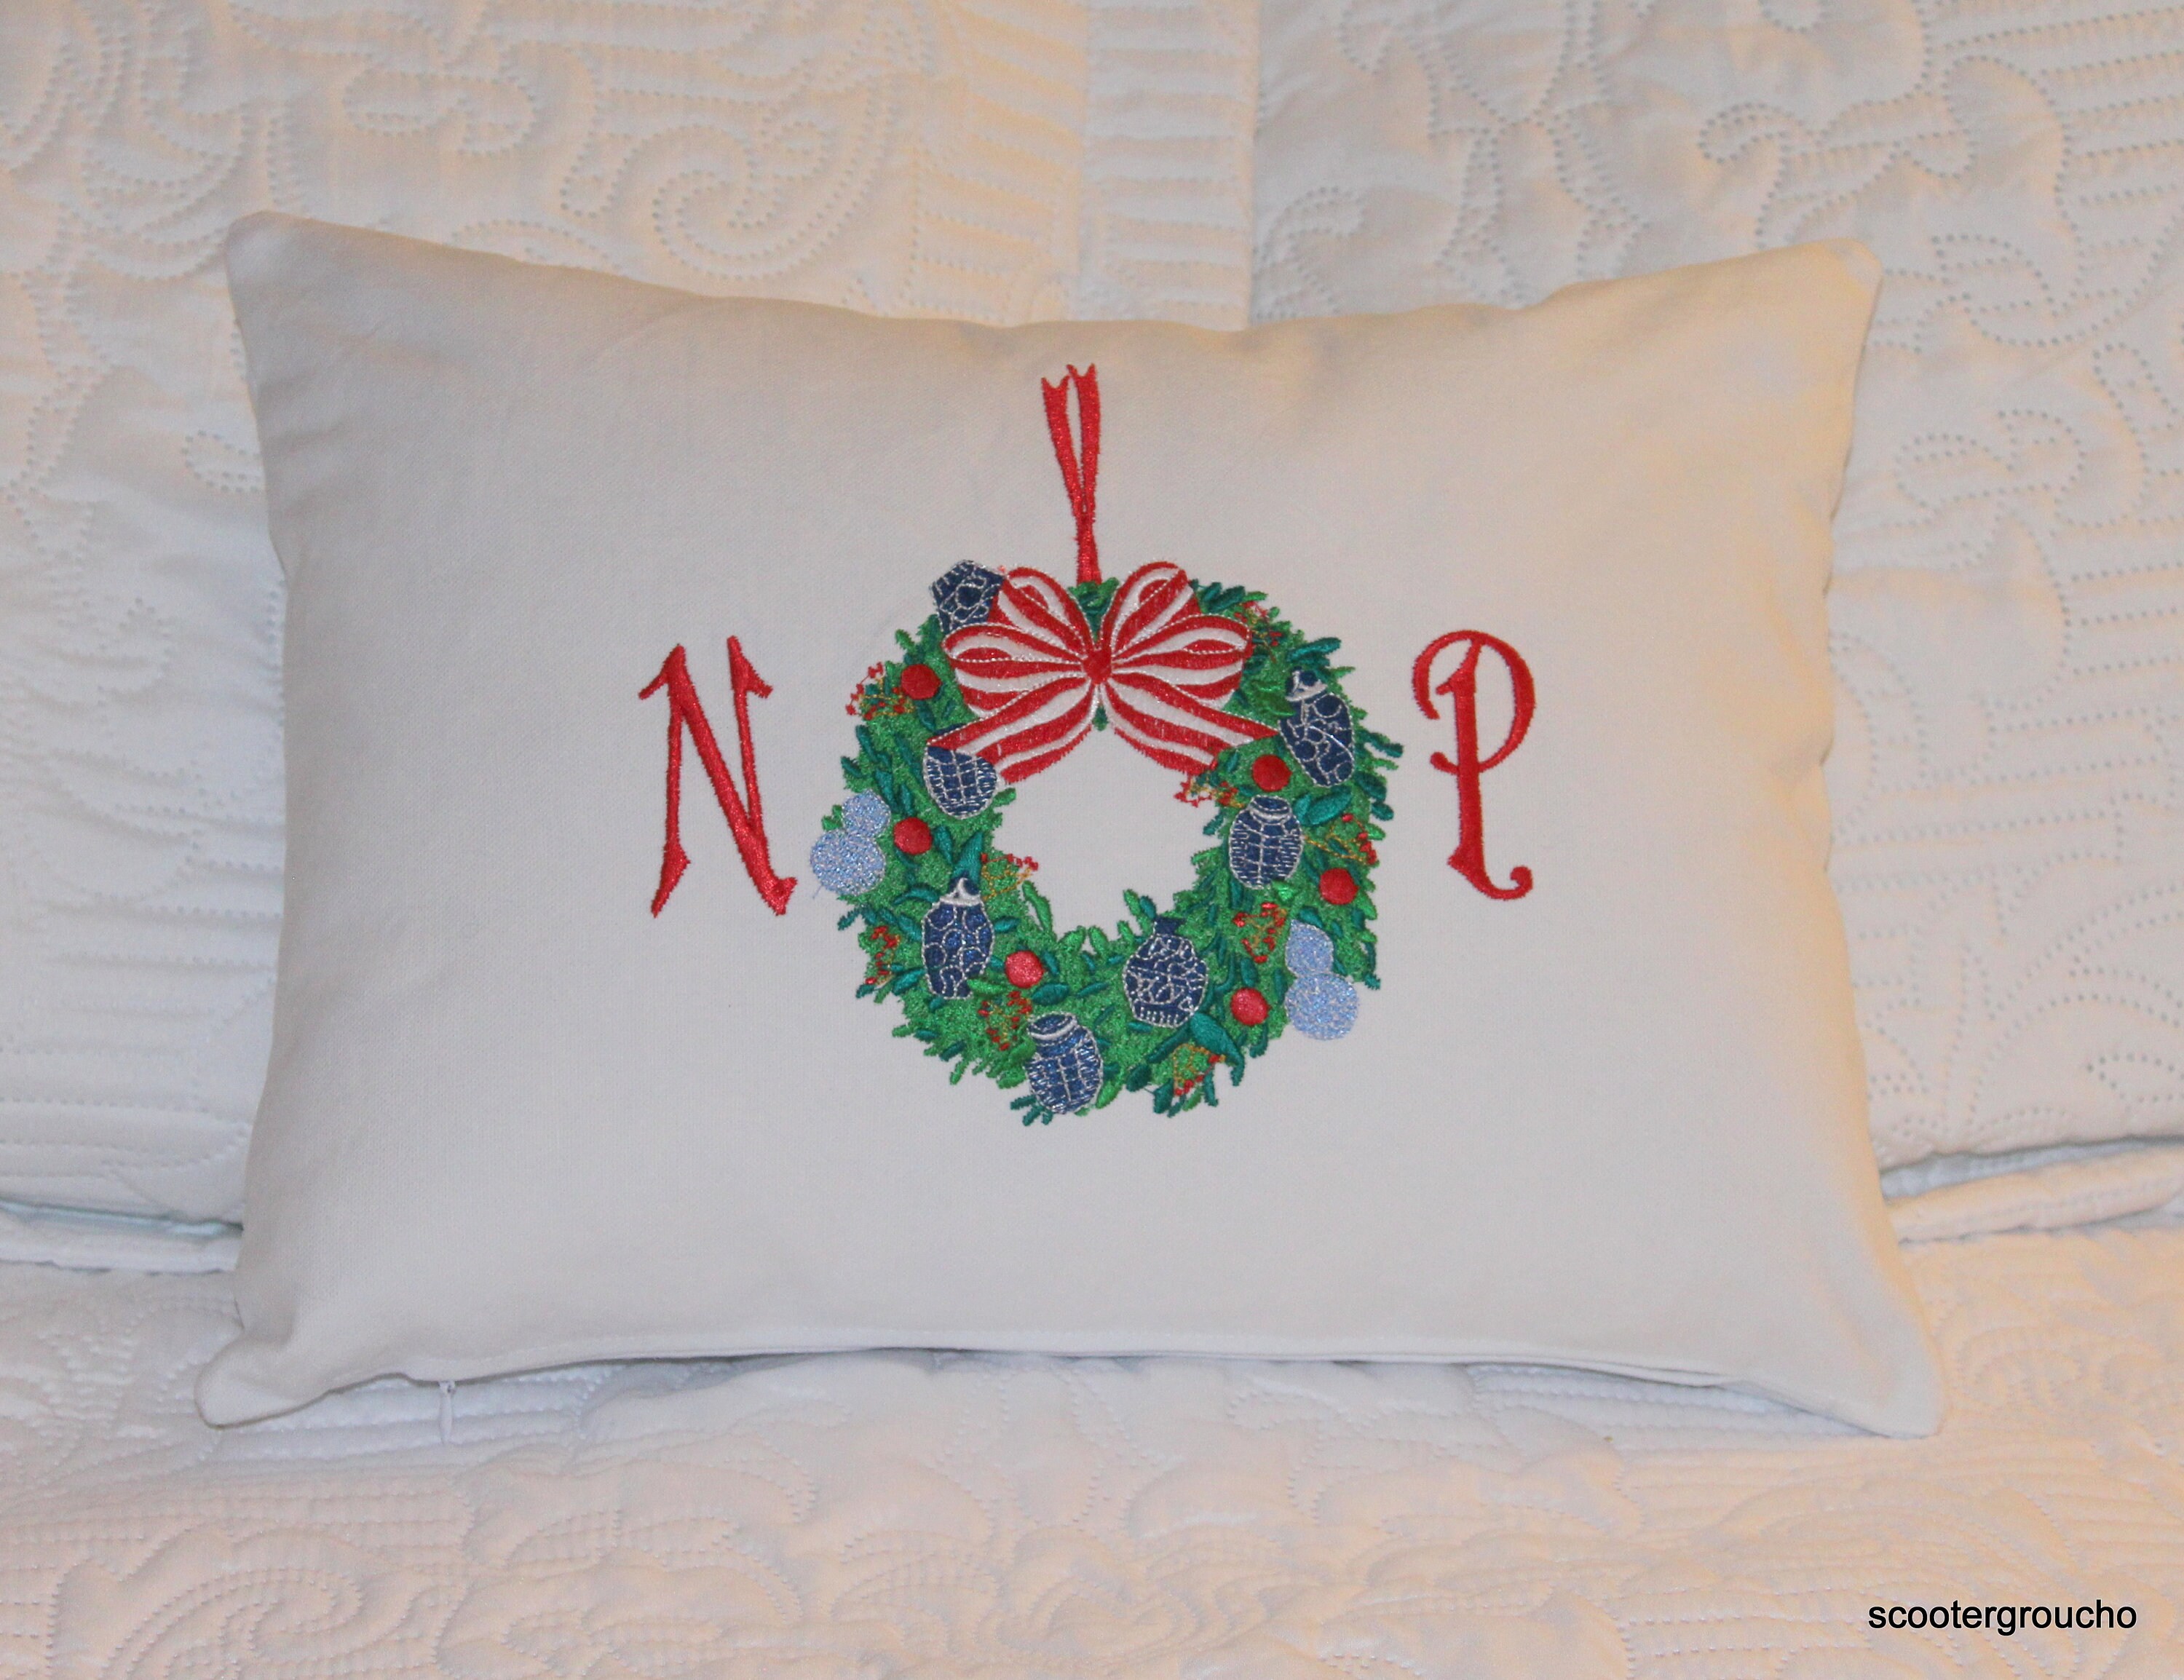 I'm Dreaming of a white Christmas #10 Pillow Cover 17x17 inch